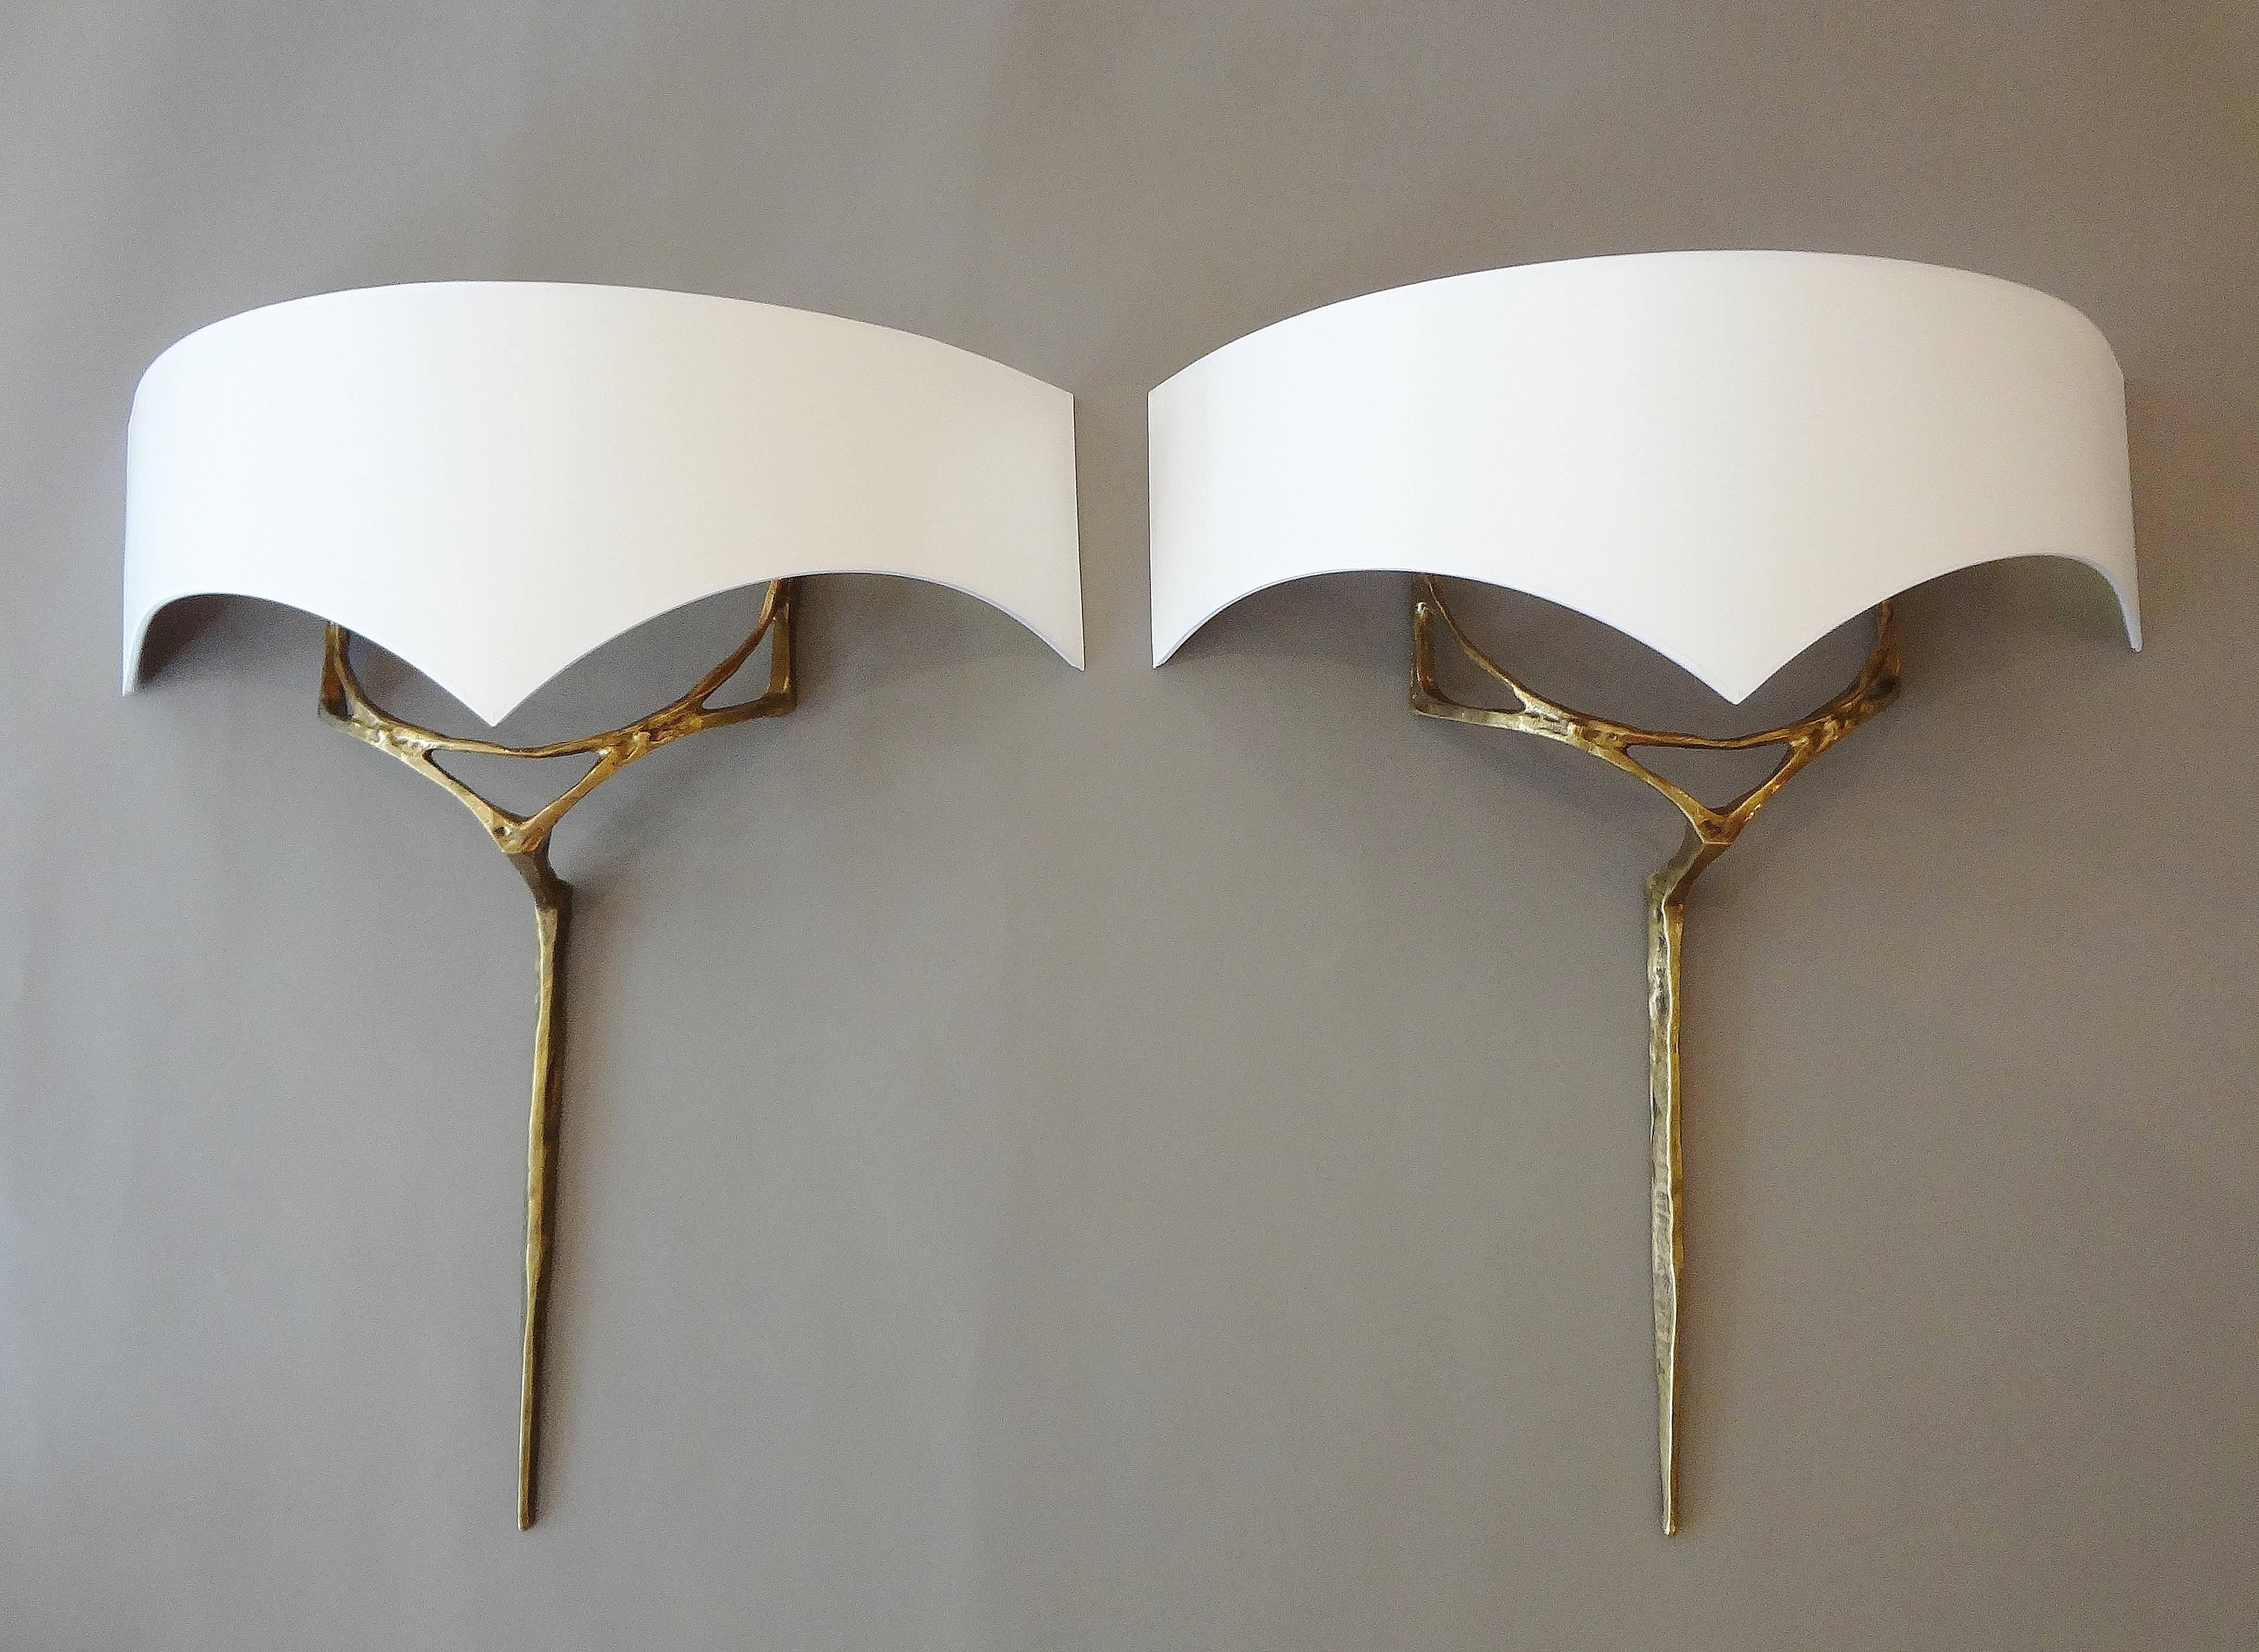 Polished Pair of Gilt Bronze Wall-Sconces by Félix Agostini, circa 1955